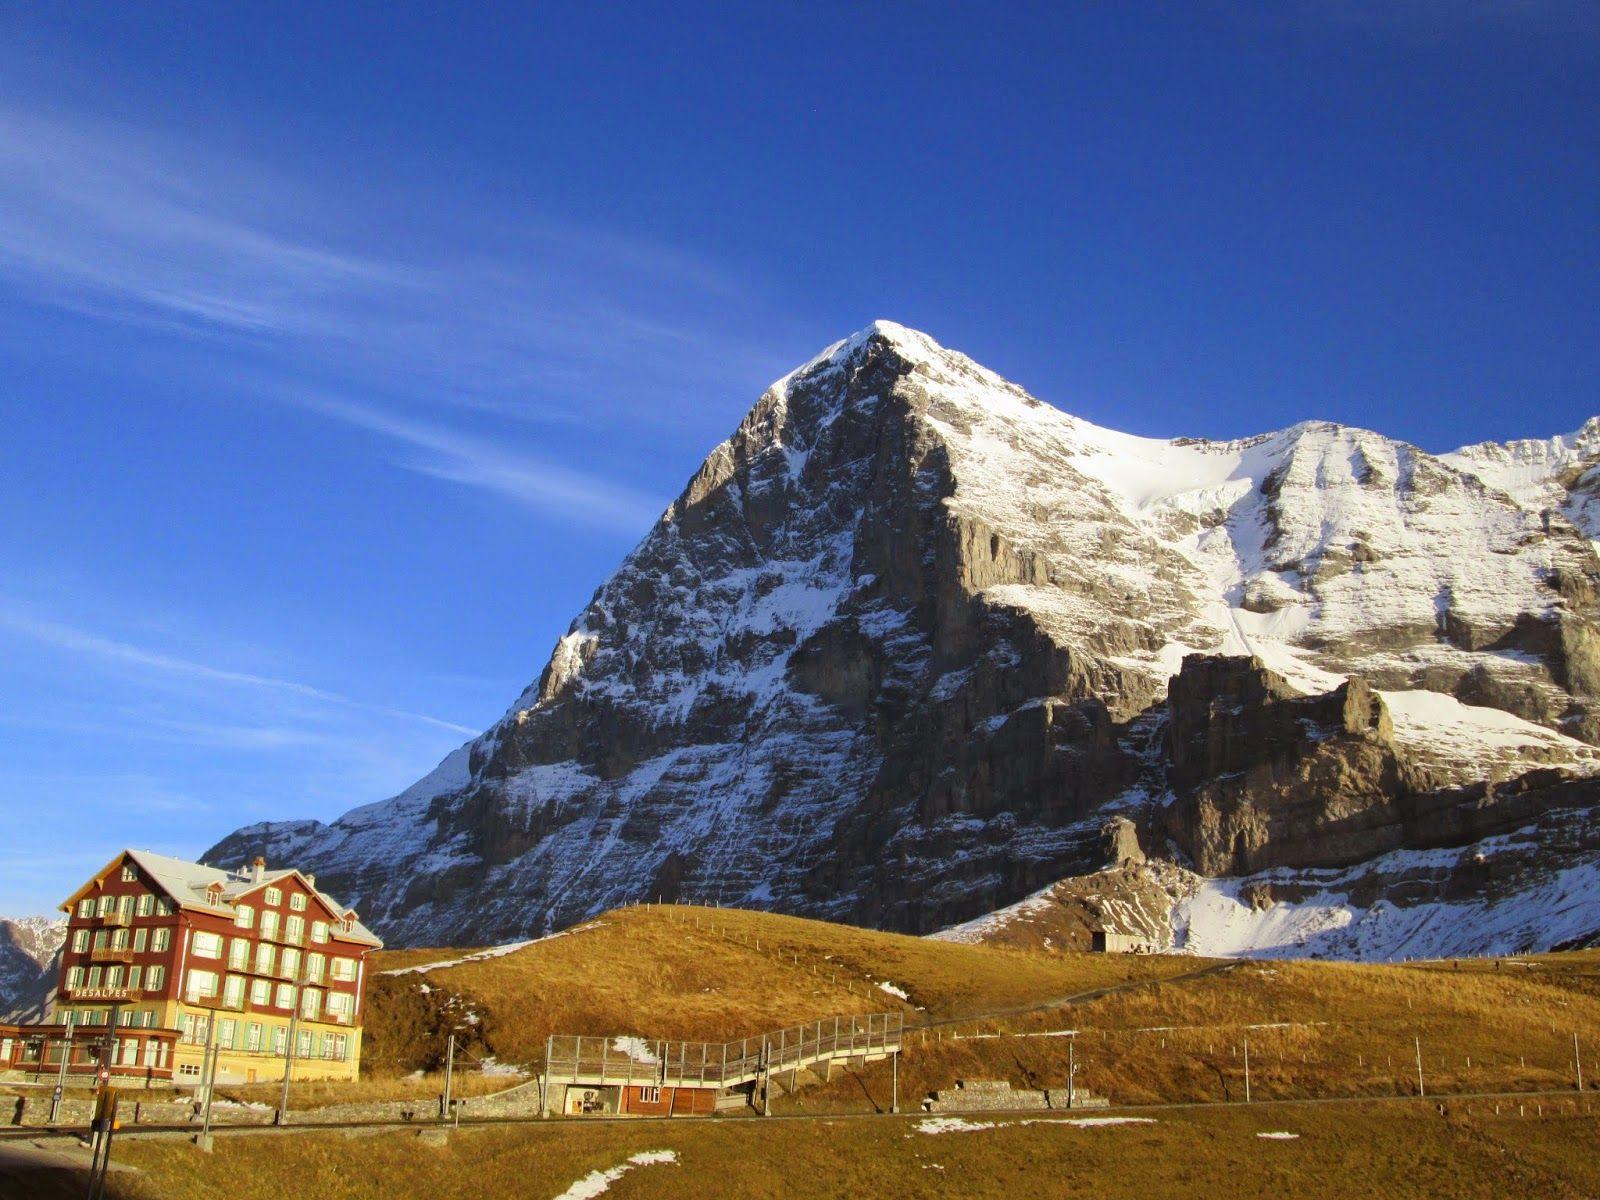 Between hangovers and overhangs: Eiger North Face